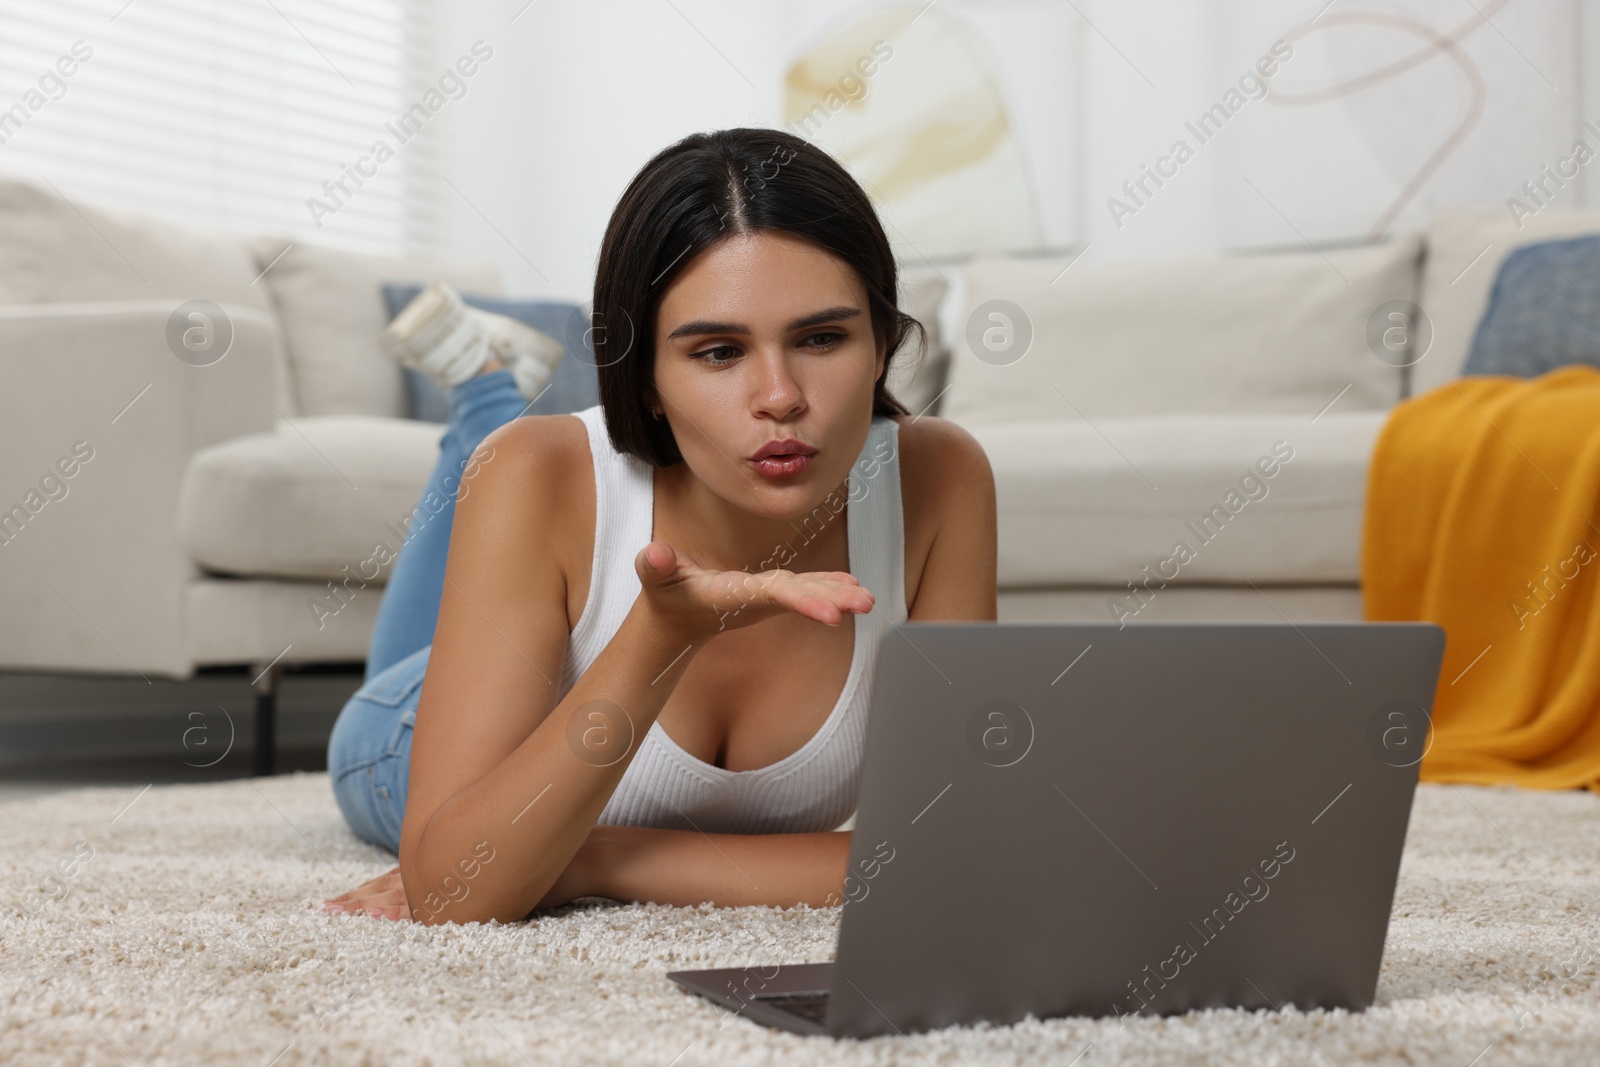 Photo of Young woman having video chat via laptop and blowing kiss on floor at home